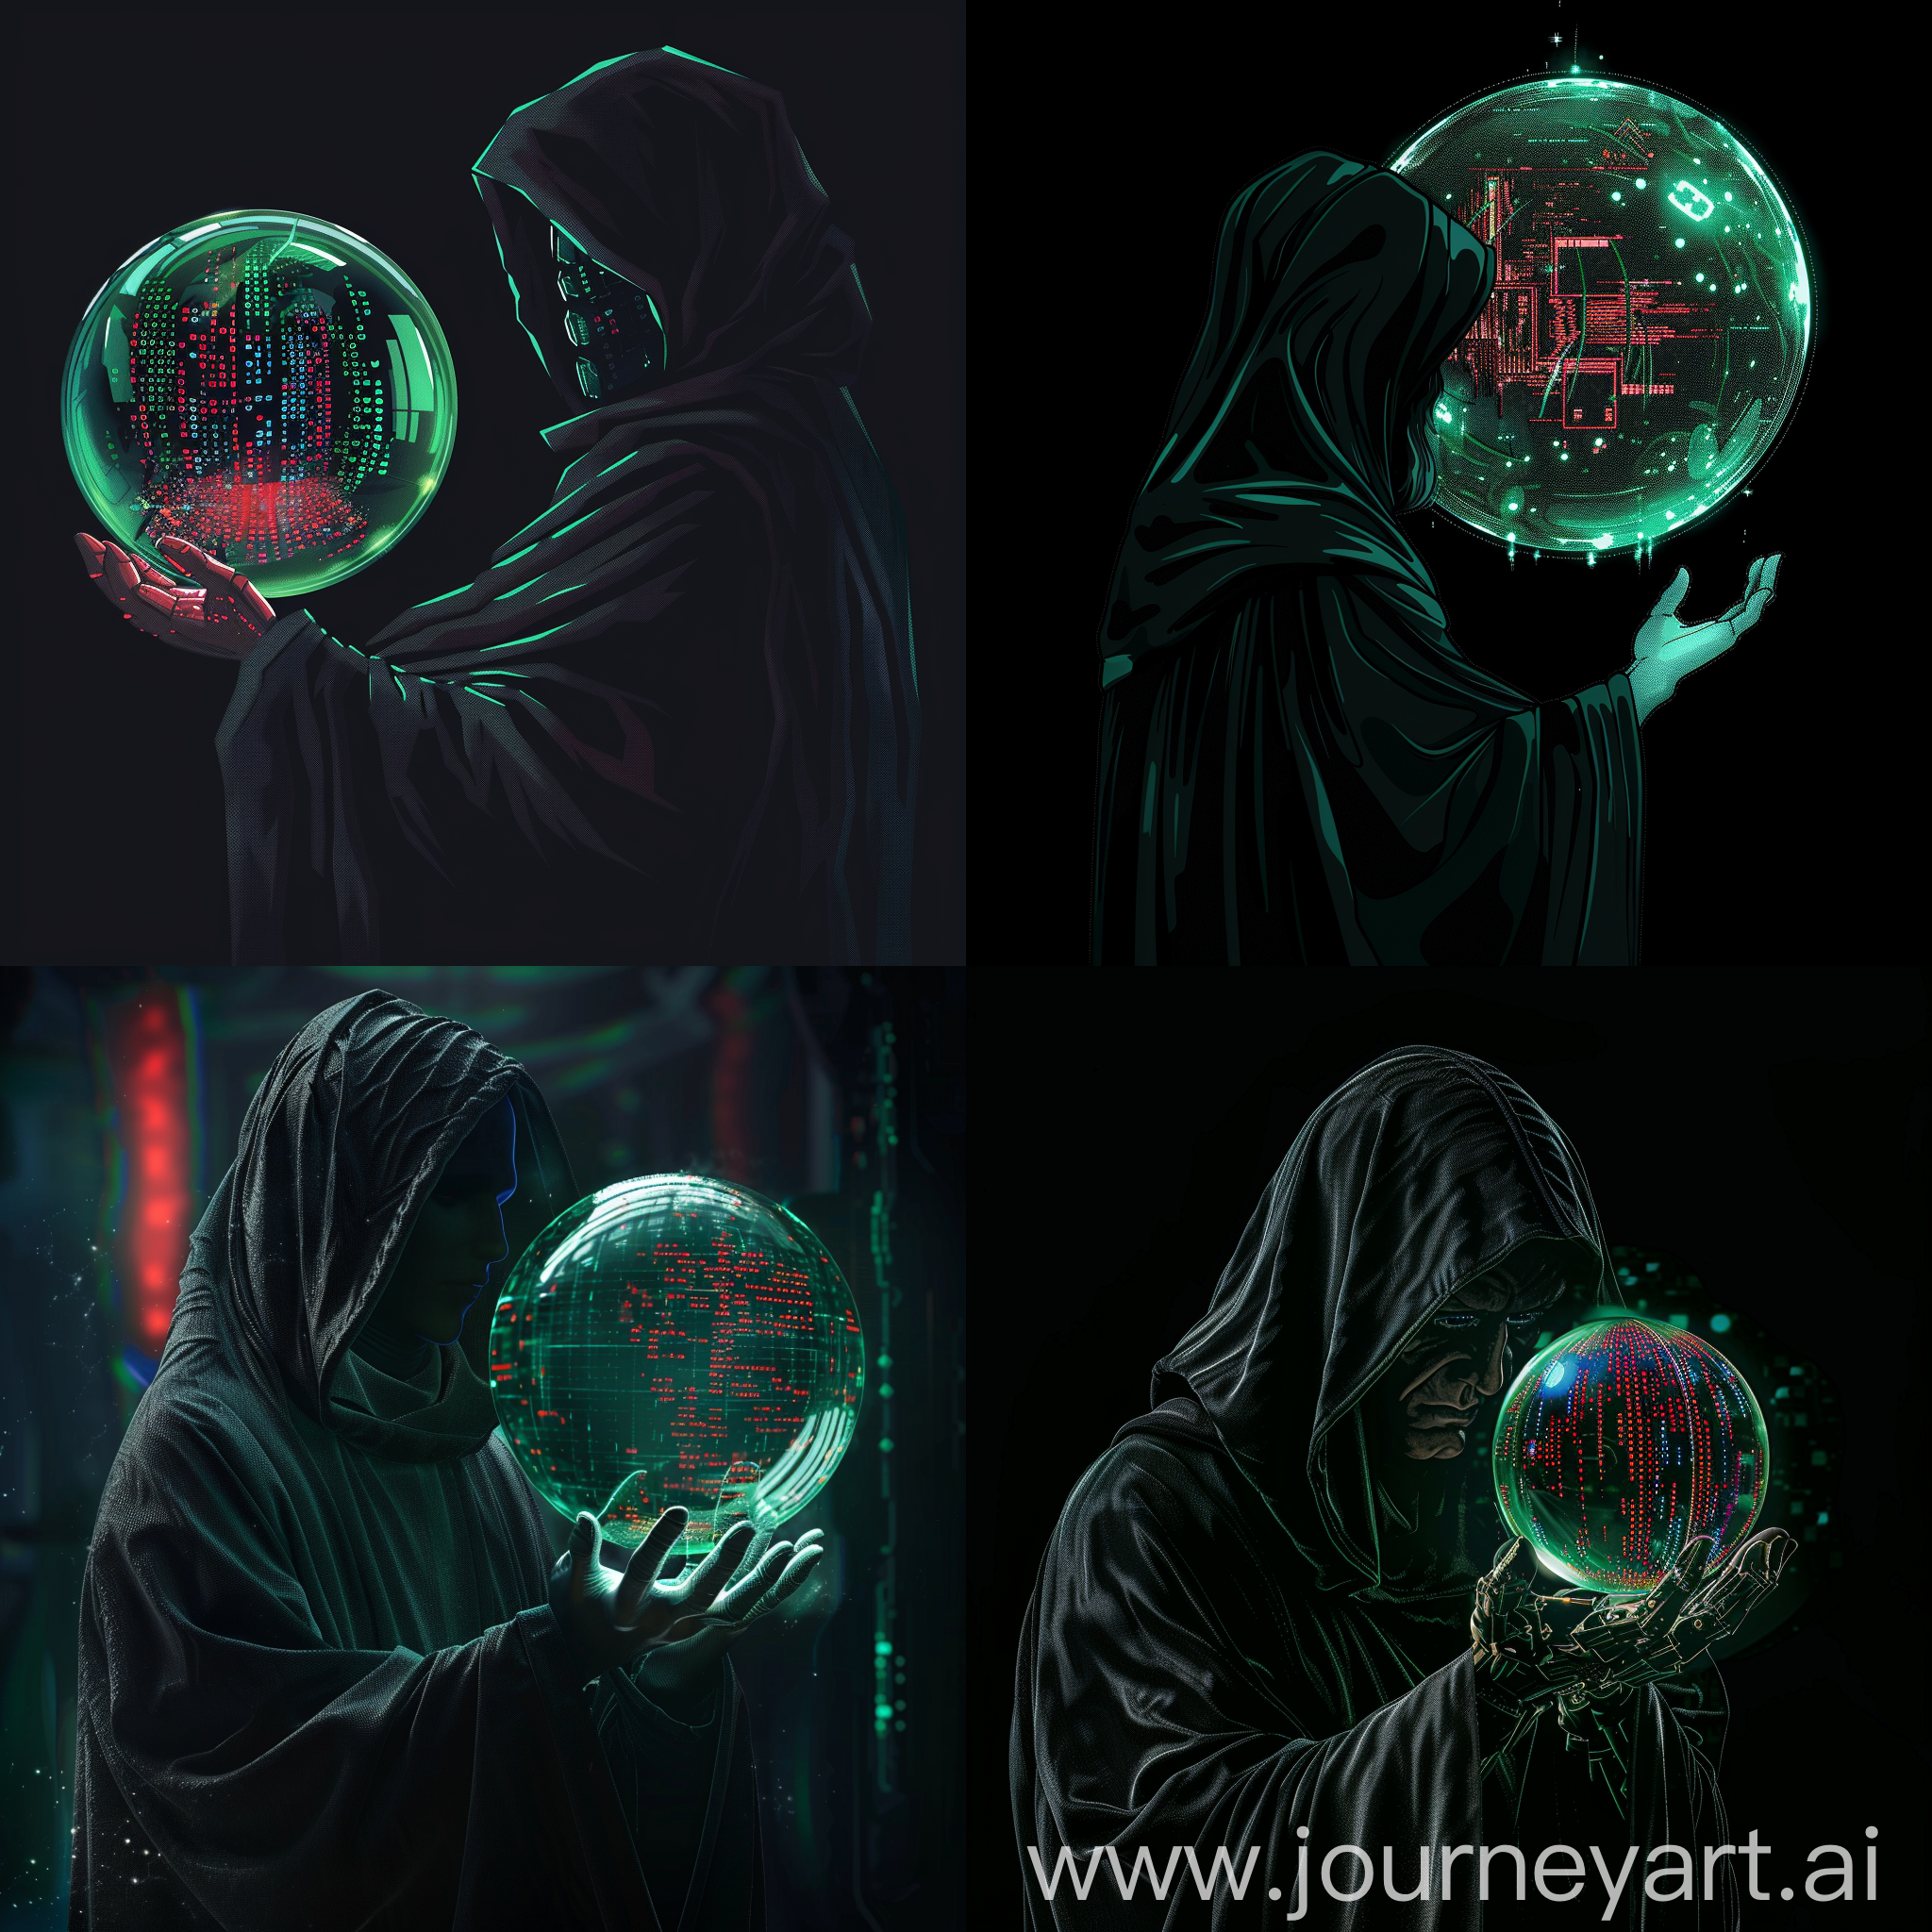 logo. faceless wizard in black robe scrying translucent green orb with red and blue cyber data inside.